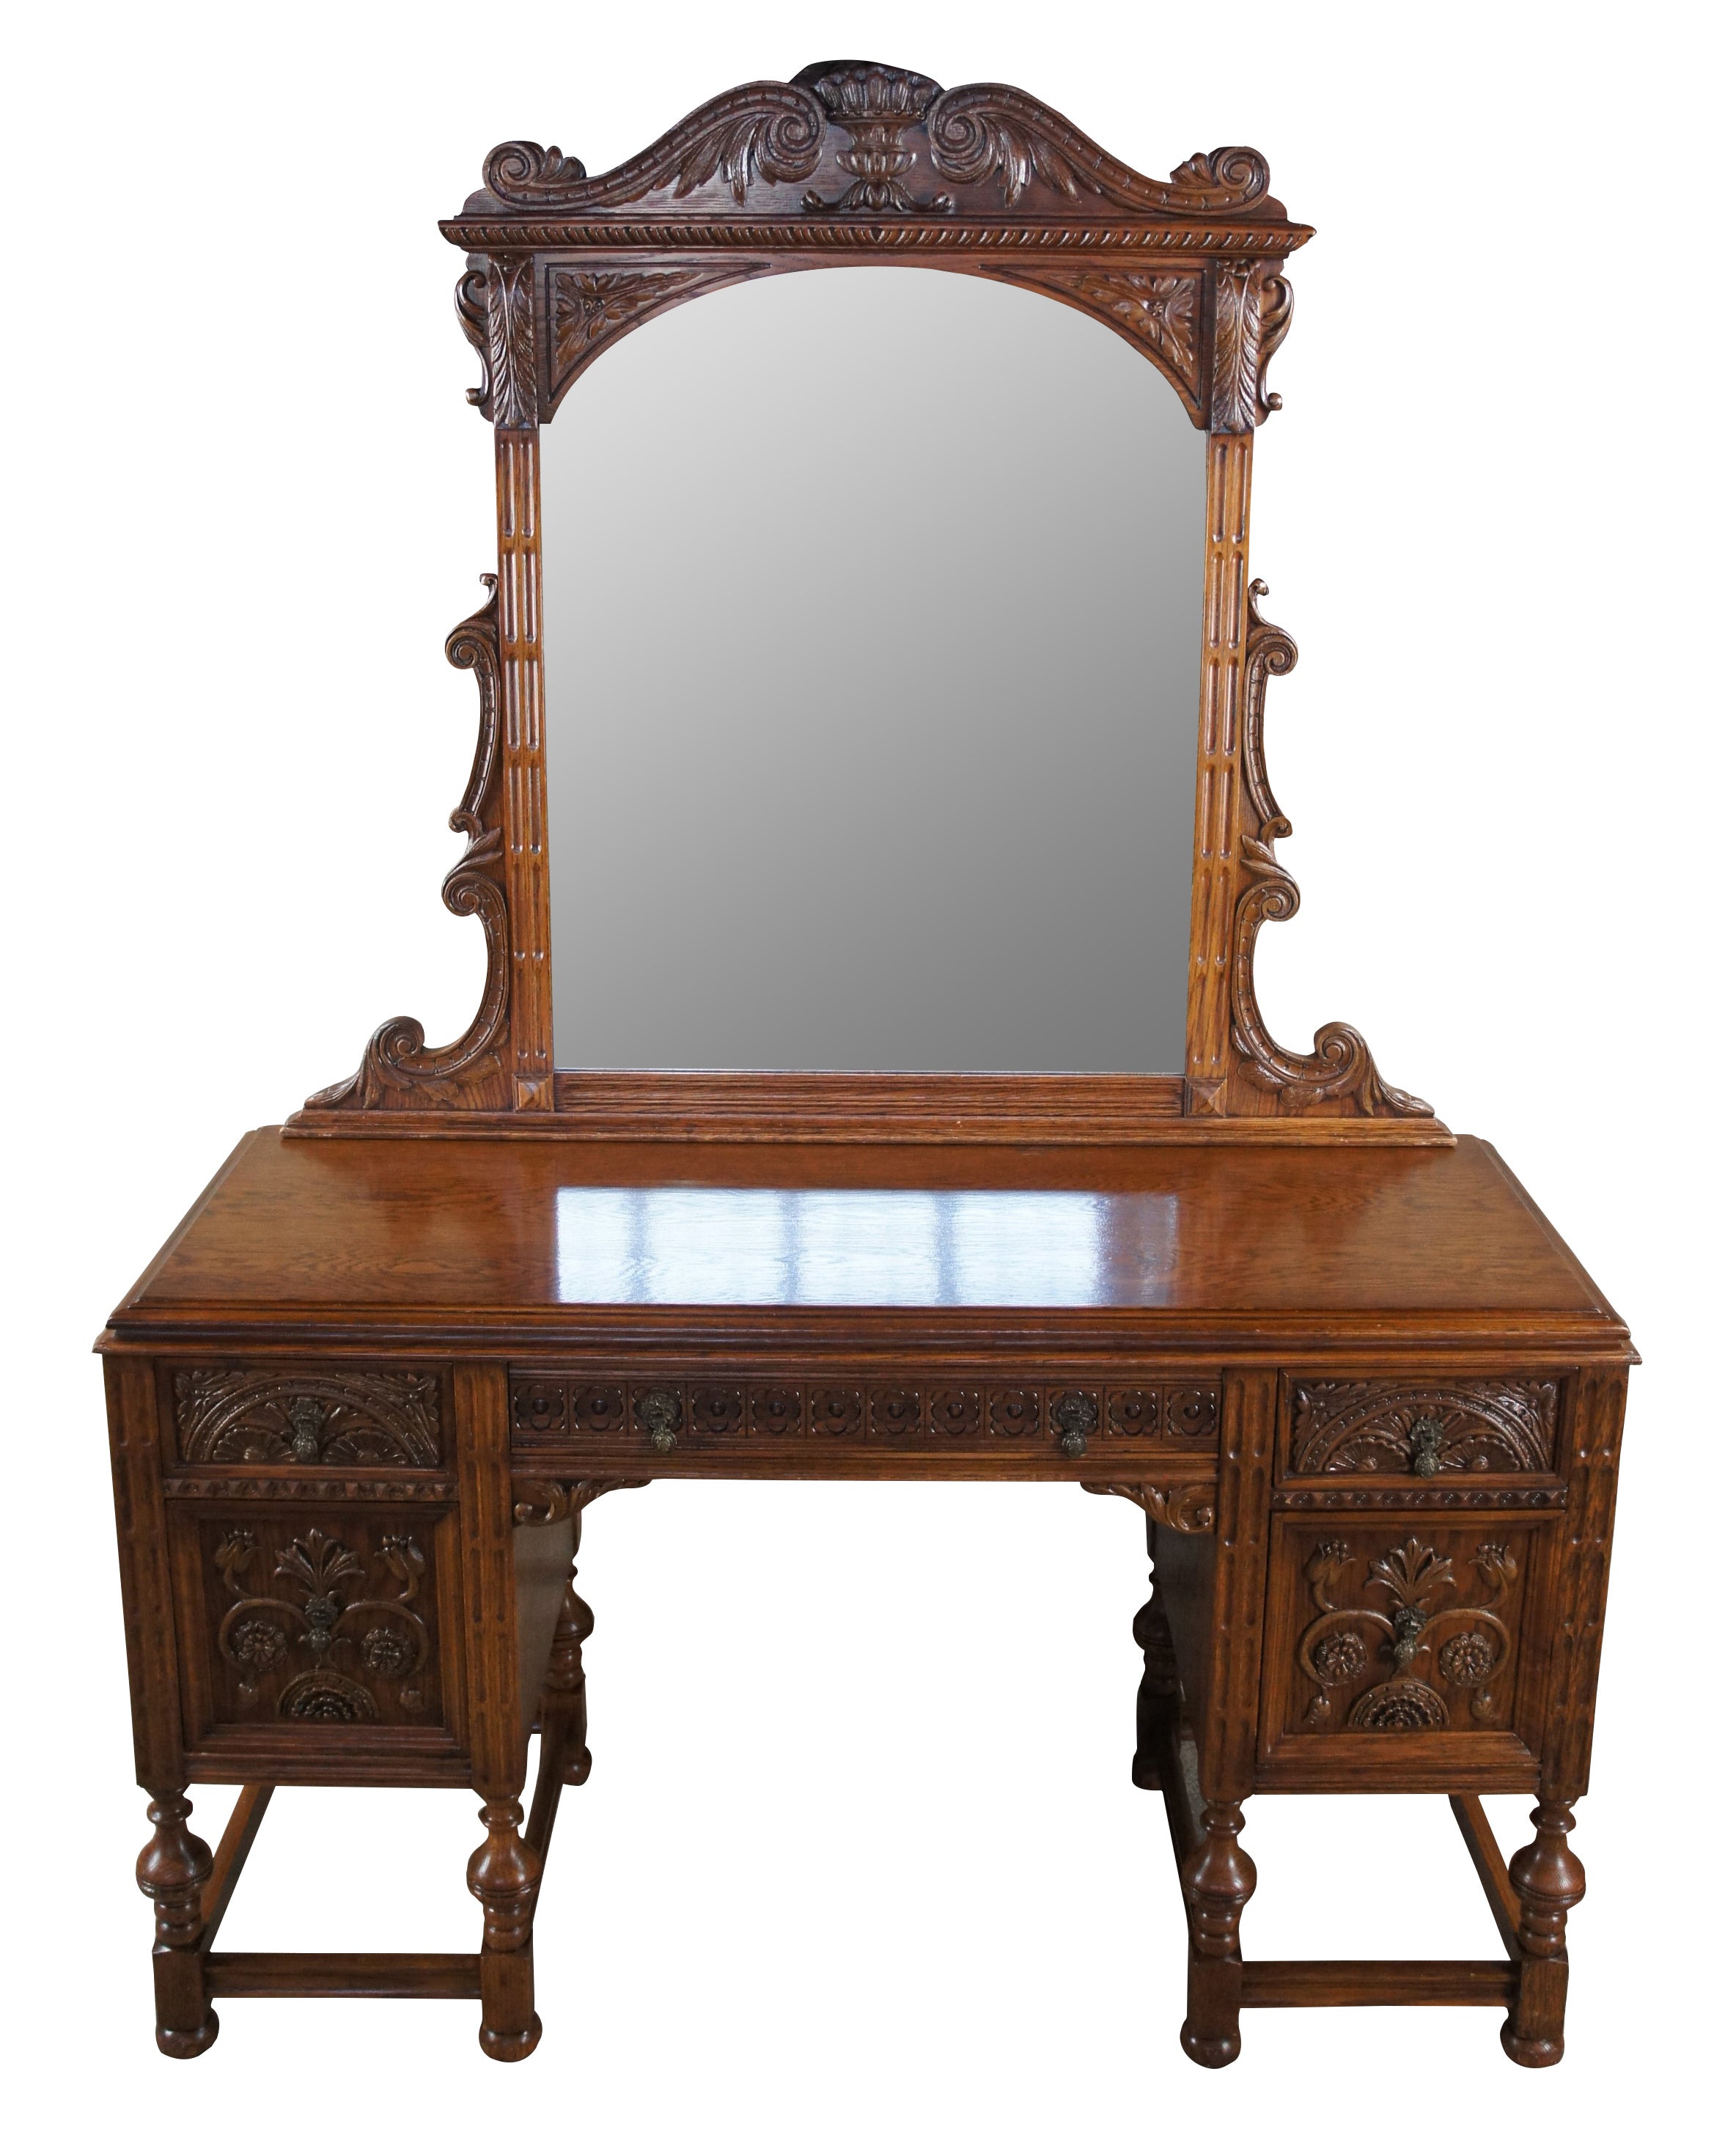 American Furniture Company Gothic or Spanish Renaissance Revival vanity desk and mirror. Operating out of Batesville Indiana since 1899, they worked closely and collaborated in part with Romweber. Specializing in high grade bedroom suites &